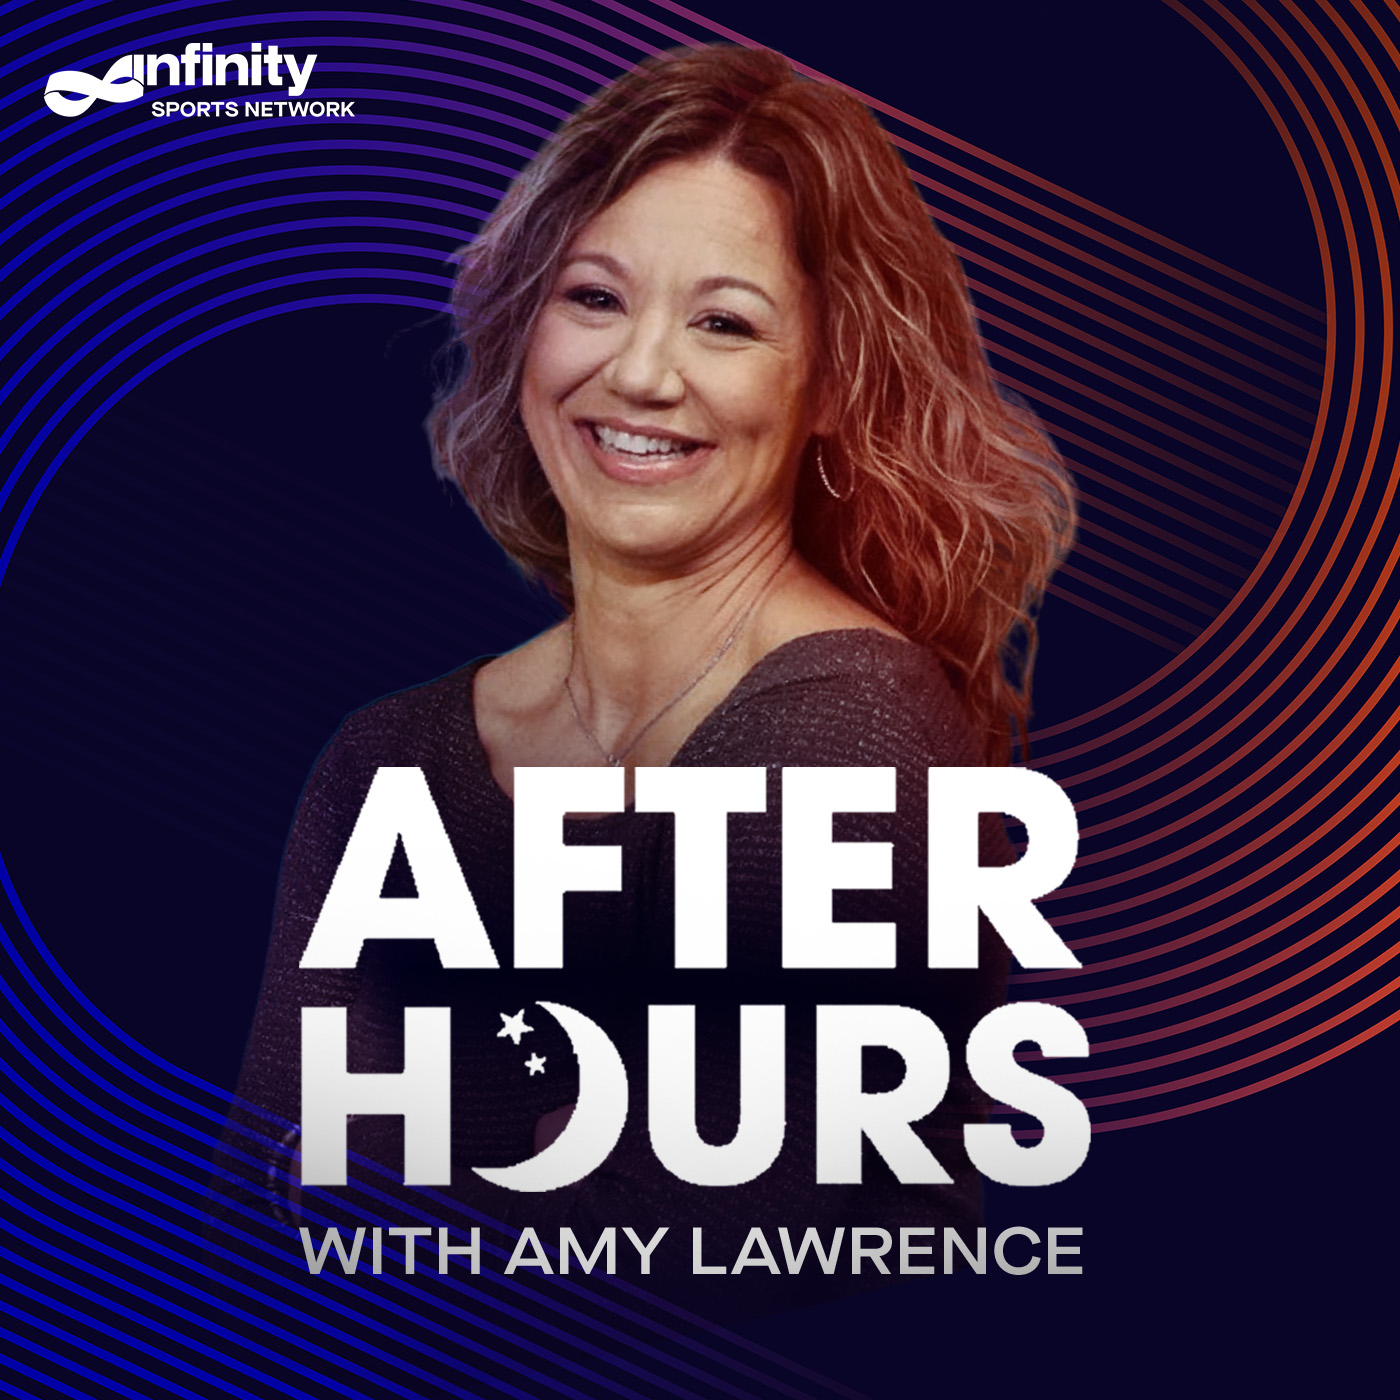 After Hours with Amy Lawrence - Rob Long, Sports Talk Radio Host 105.7 The Fan Baltimore